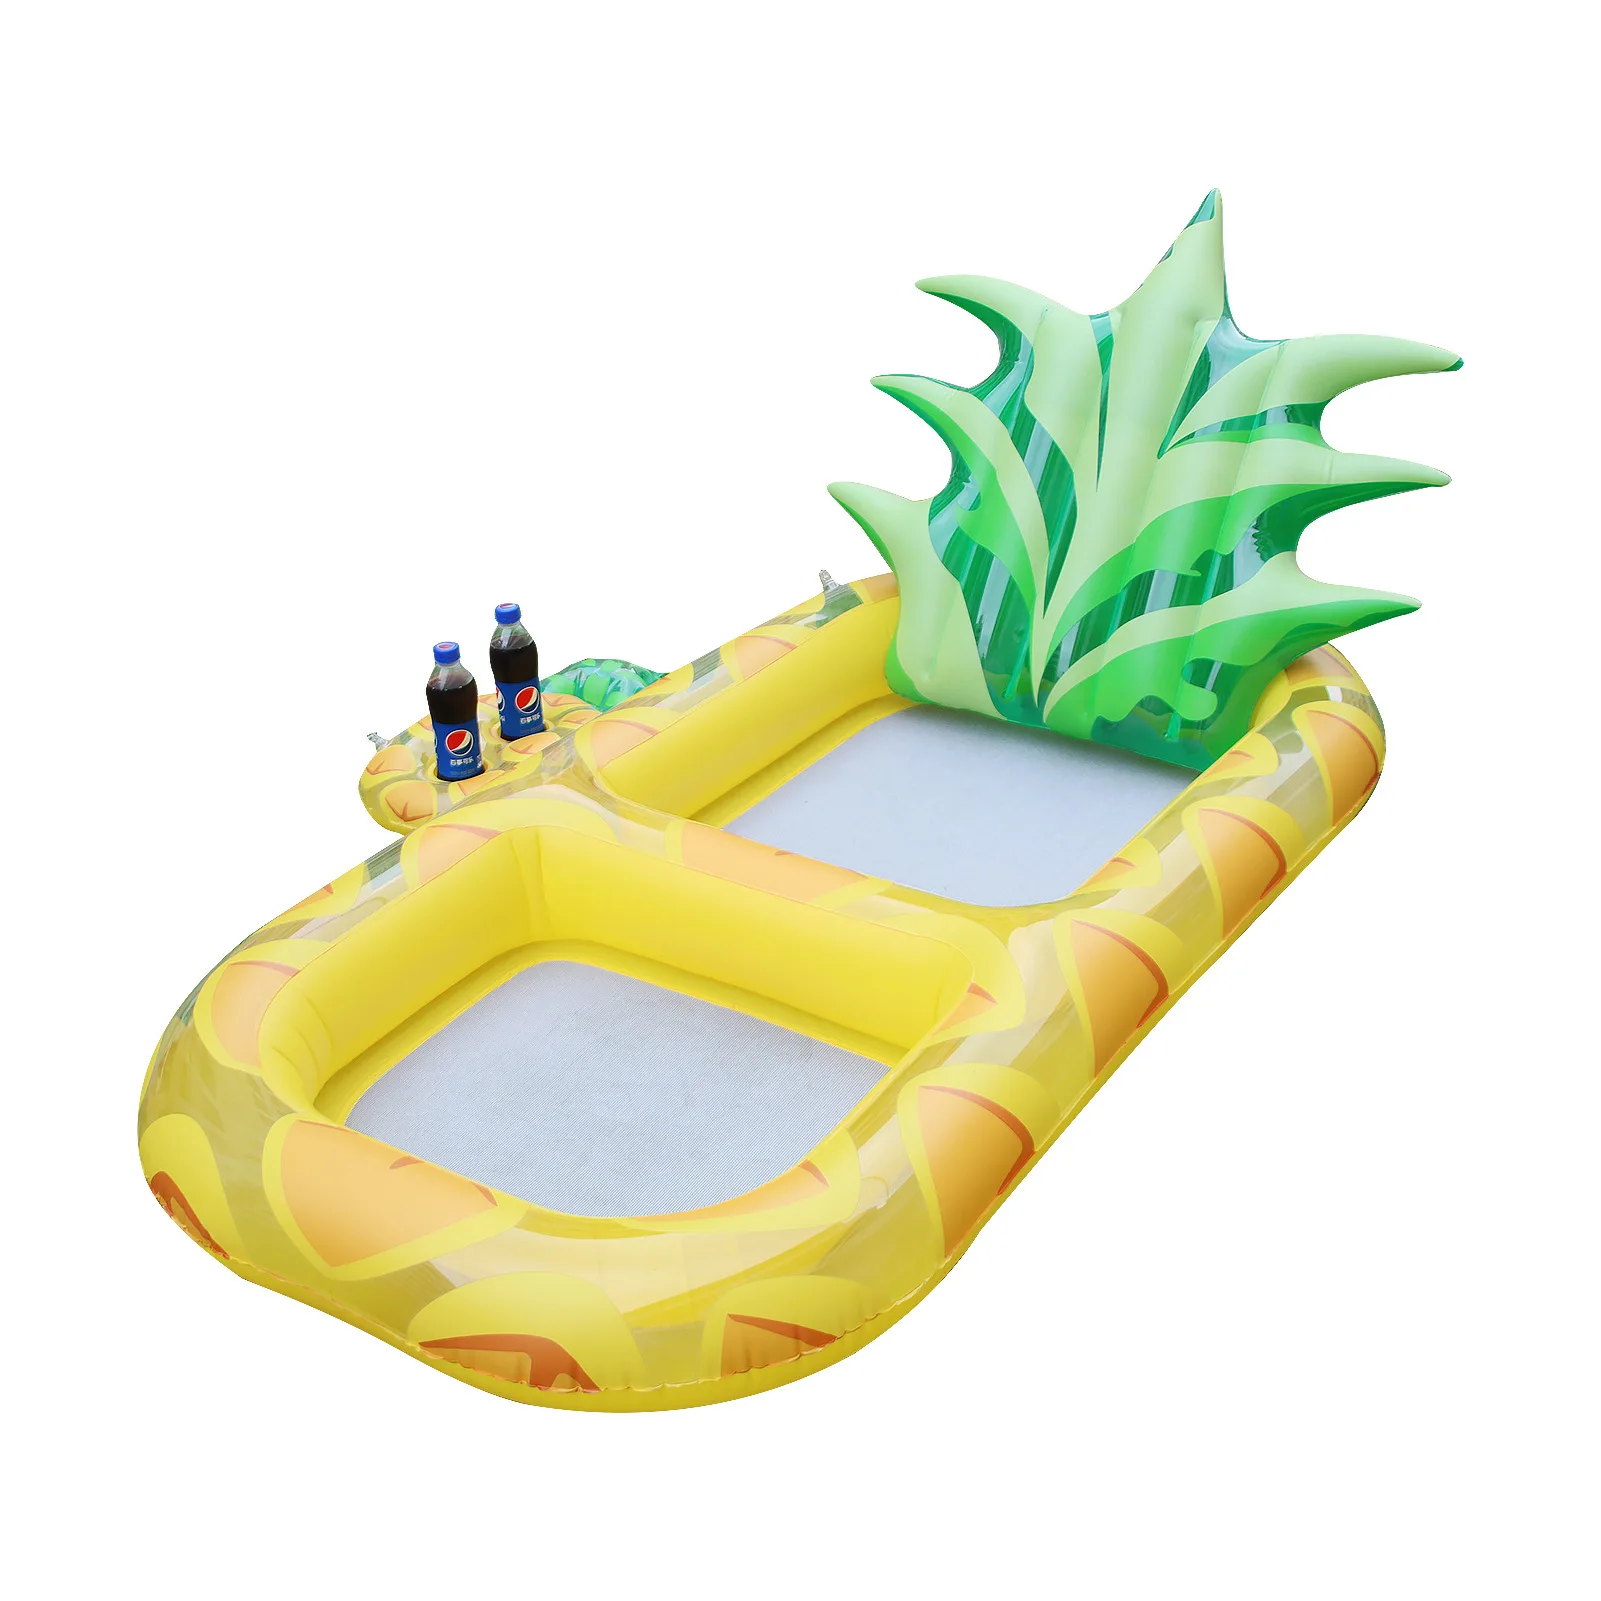 

Fun Summer Swimming Pool Floating Bed Fruits Inflatable Pool Float Chair with Cup Holder